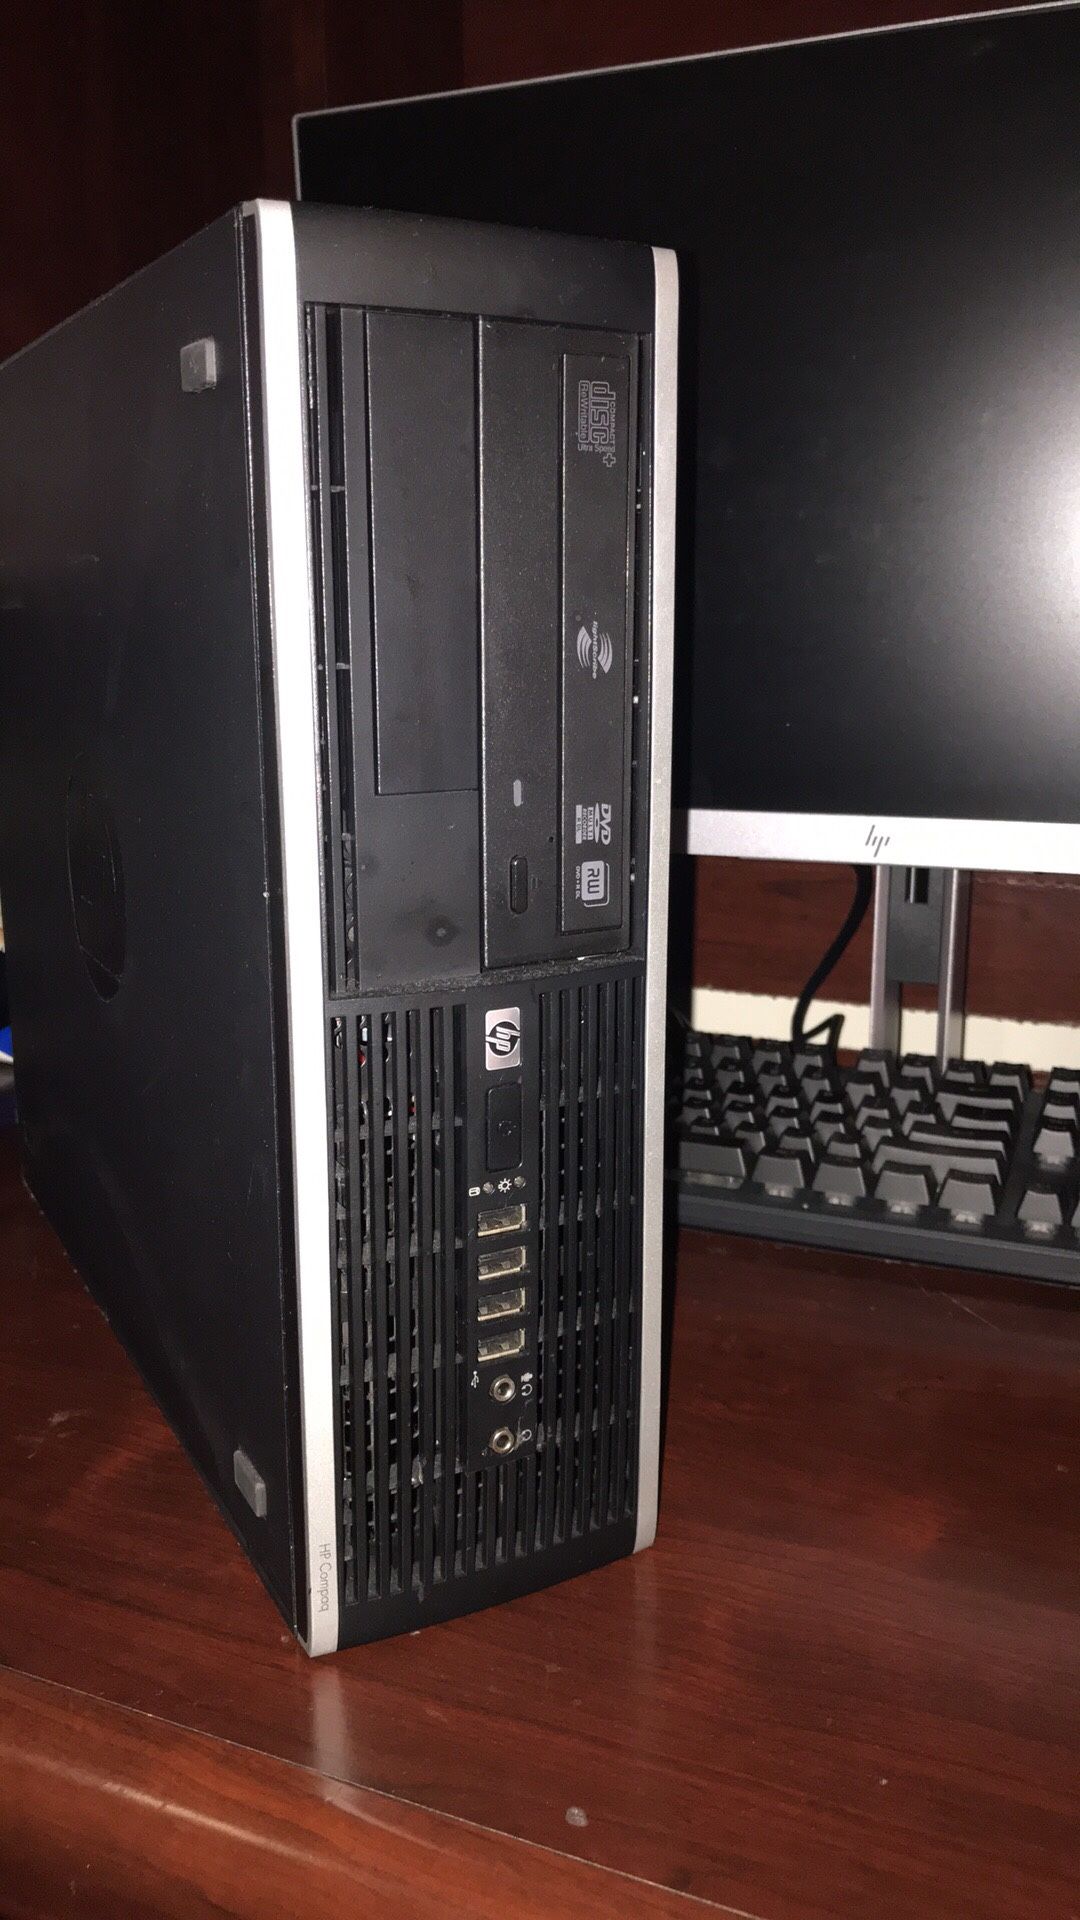 HP Desktop Computer with Mouse and Keyboard